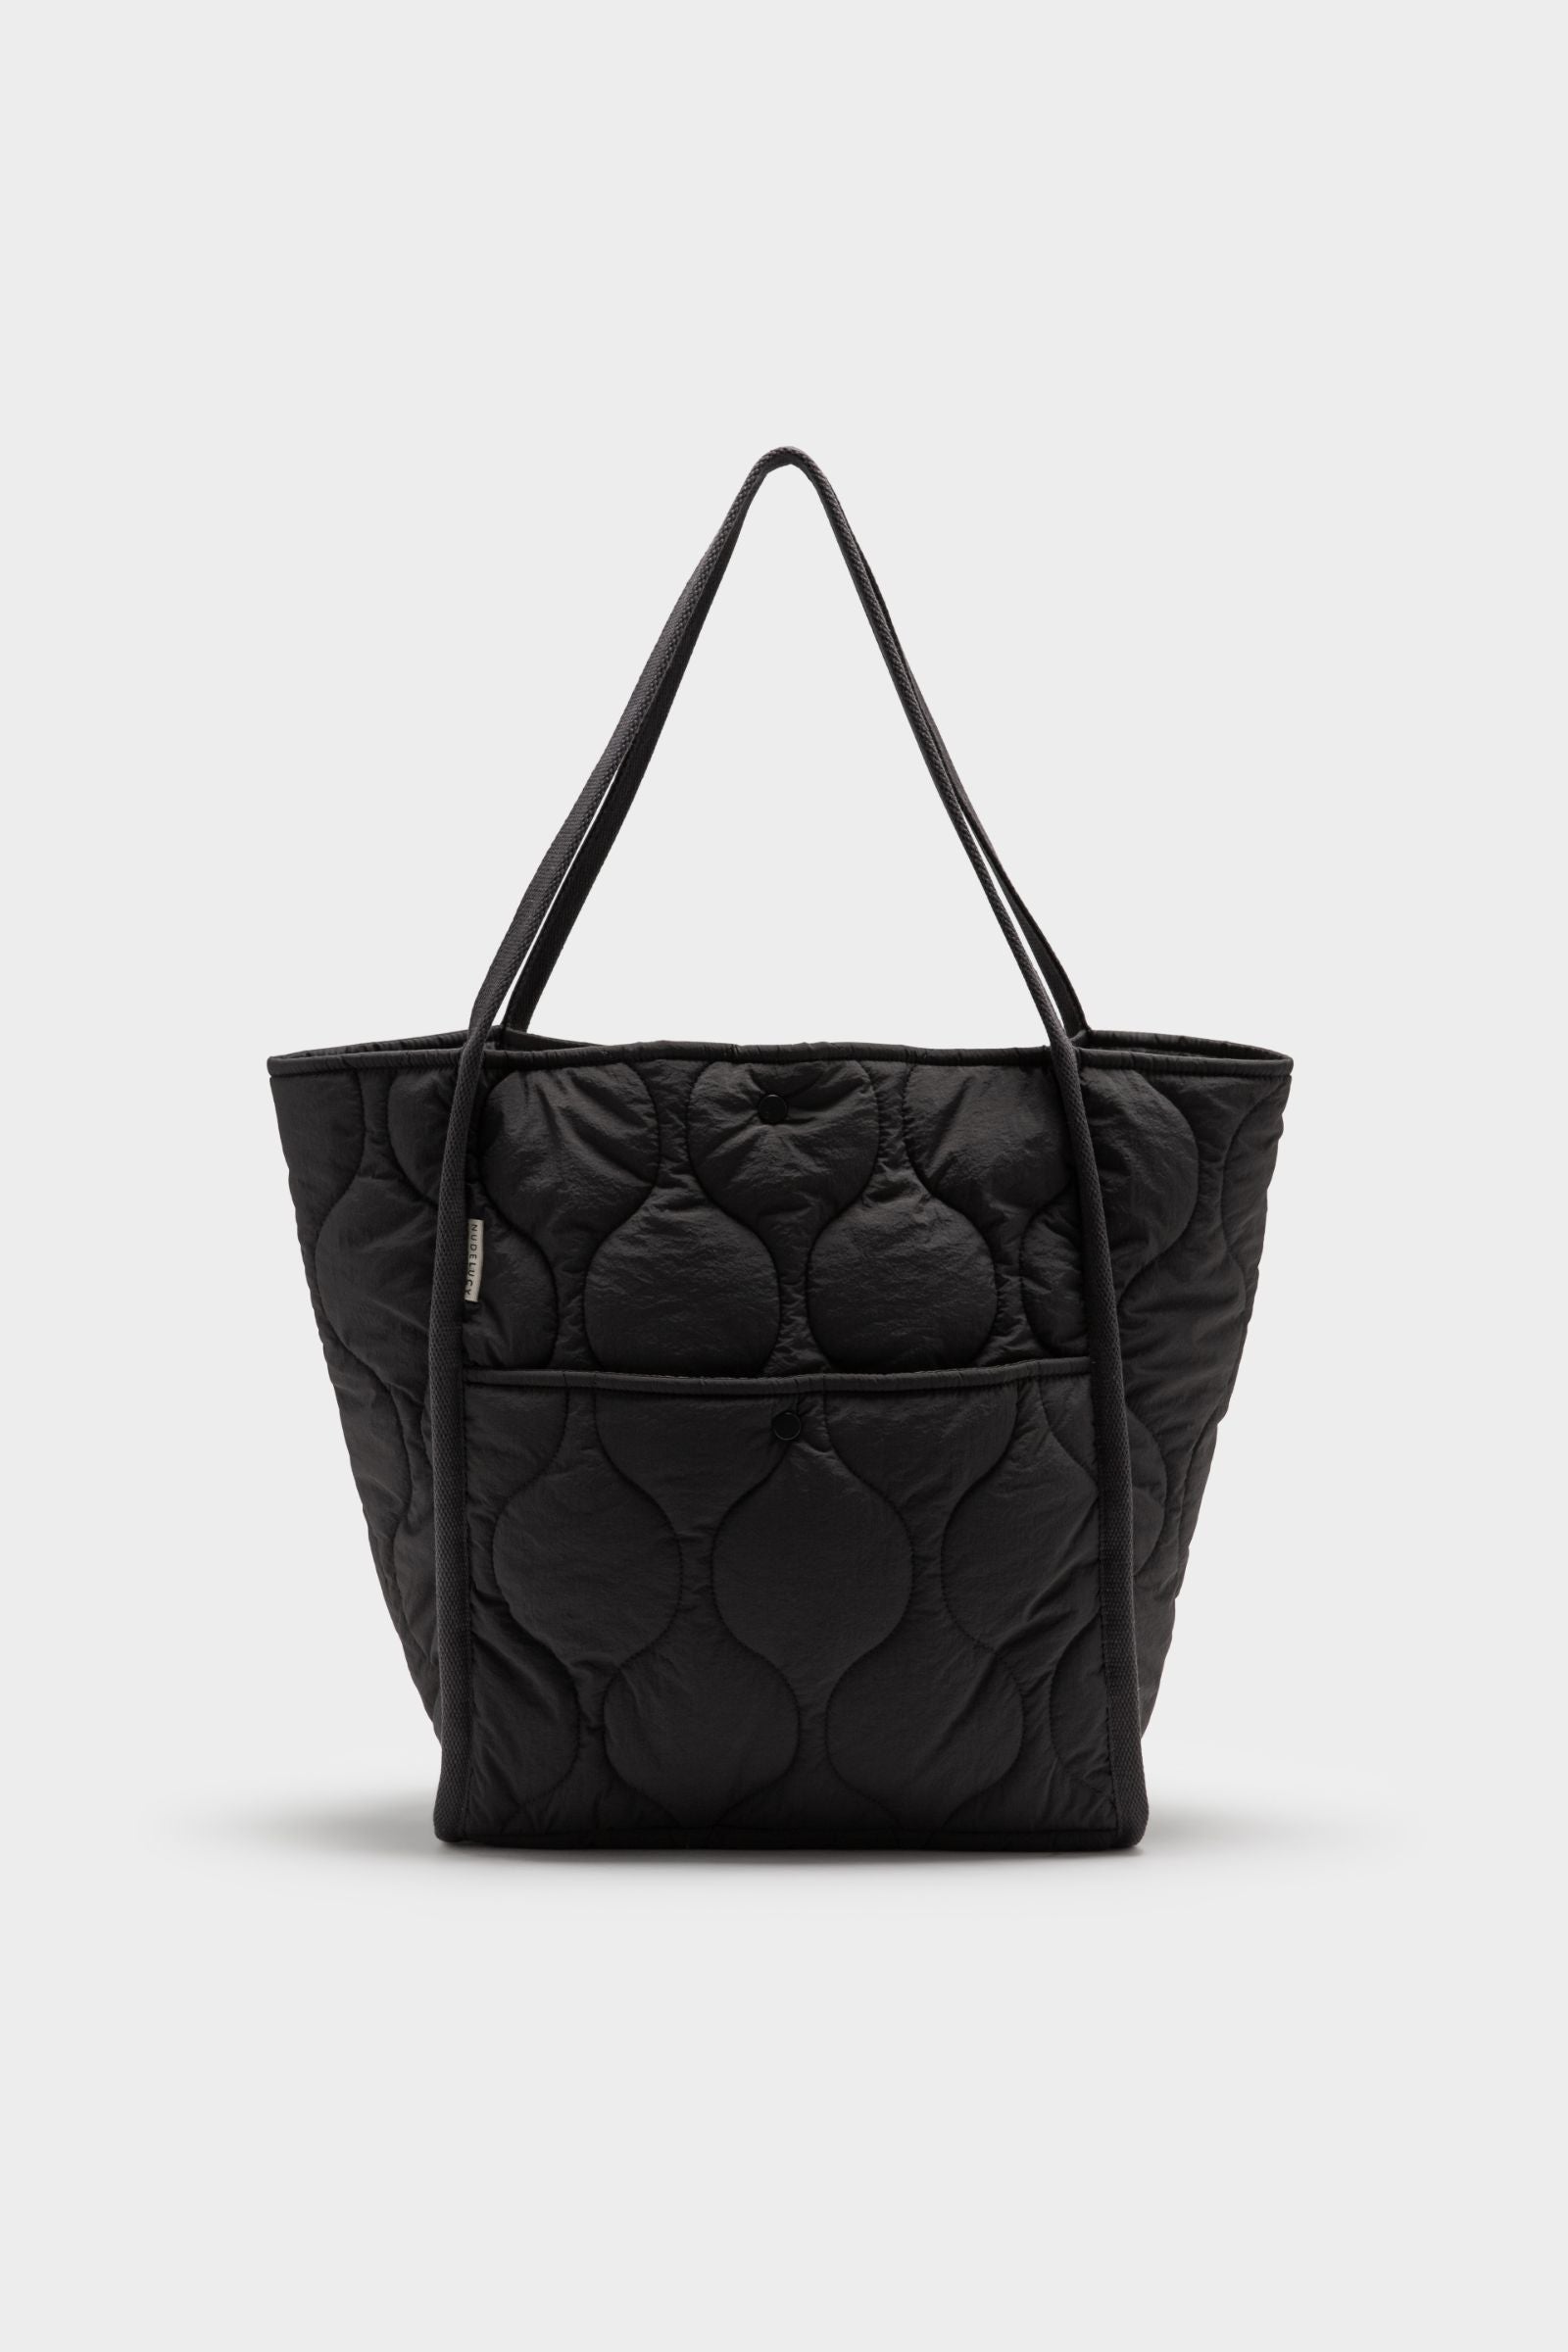 Nude Lucy Nude Puffer Tote in a Dark Grey In a Brown Coal Colour